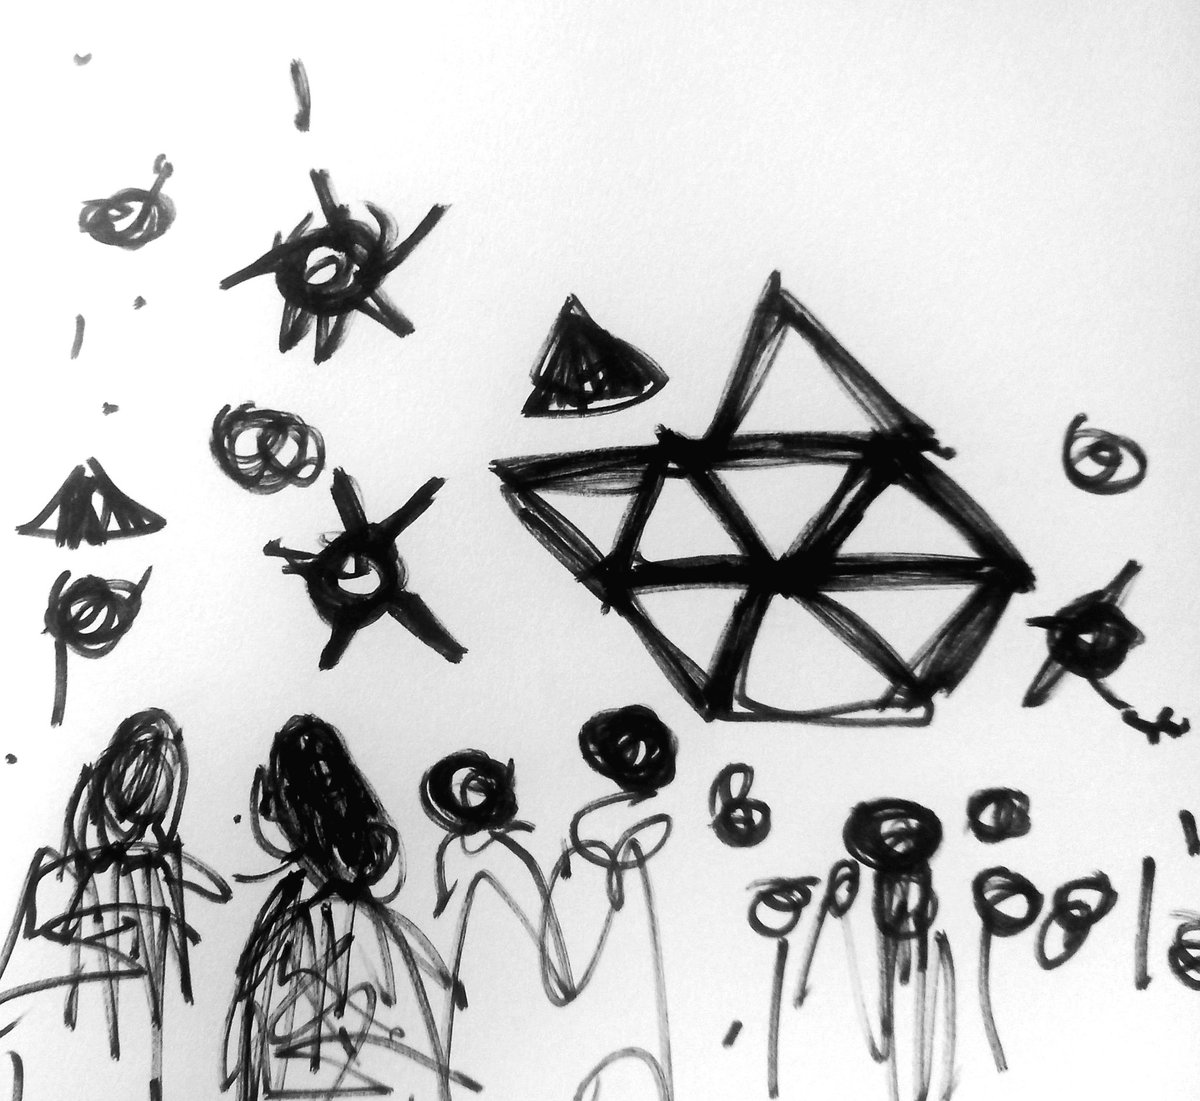 #draweveryday #everyday ' #people #walking towards #triangles ' #pen  on paper #handdrawn #sketchpad #strange #mystery #synesthesia #line #sculptural #art #architectonic #symbol #character #London #urbansketch